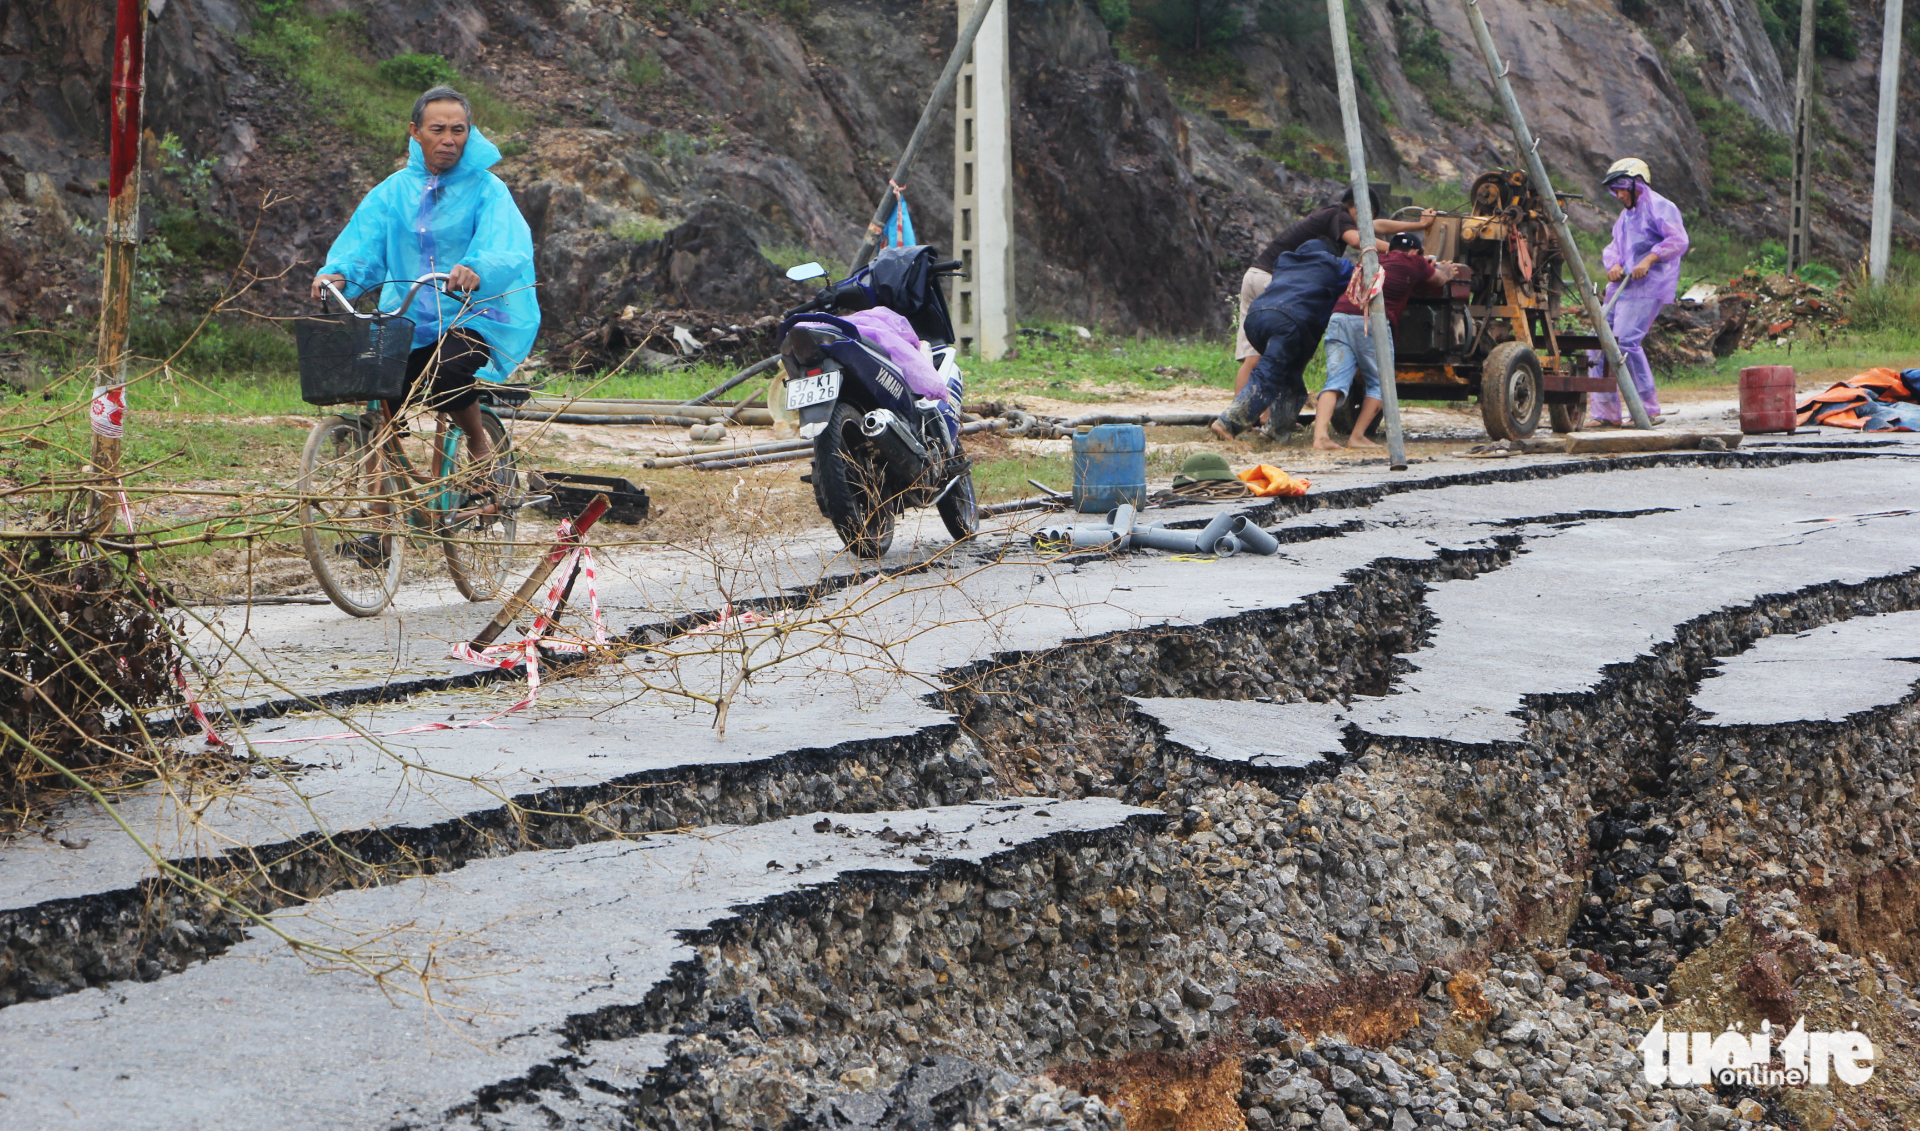 It is nearly impossible to travel on this road. Photo: Tuoi Tre